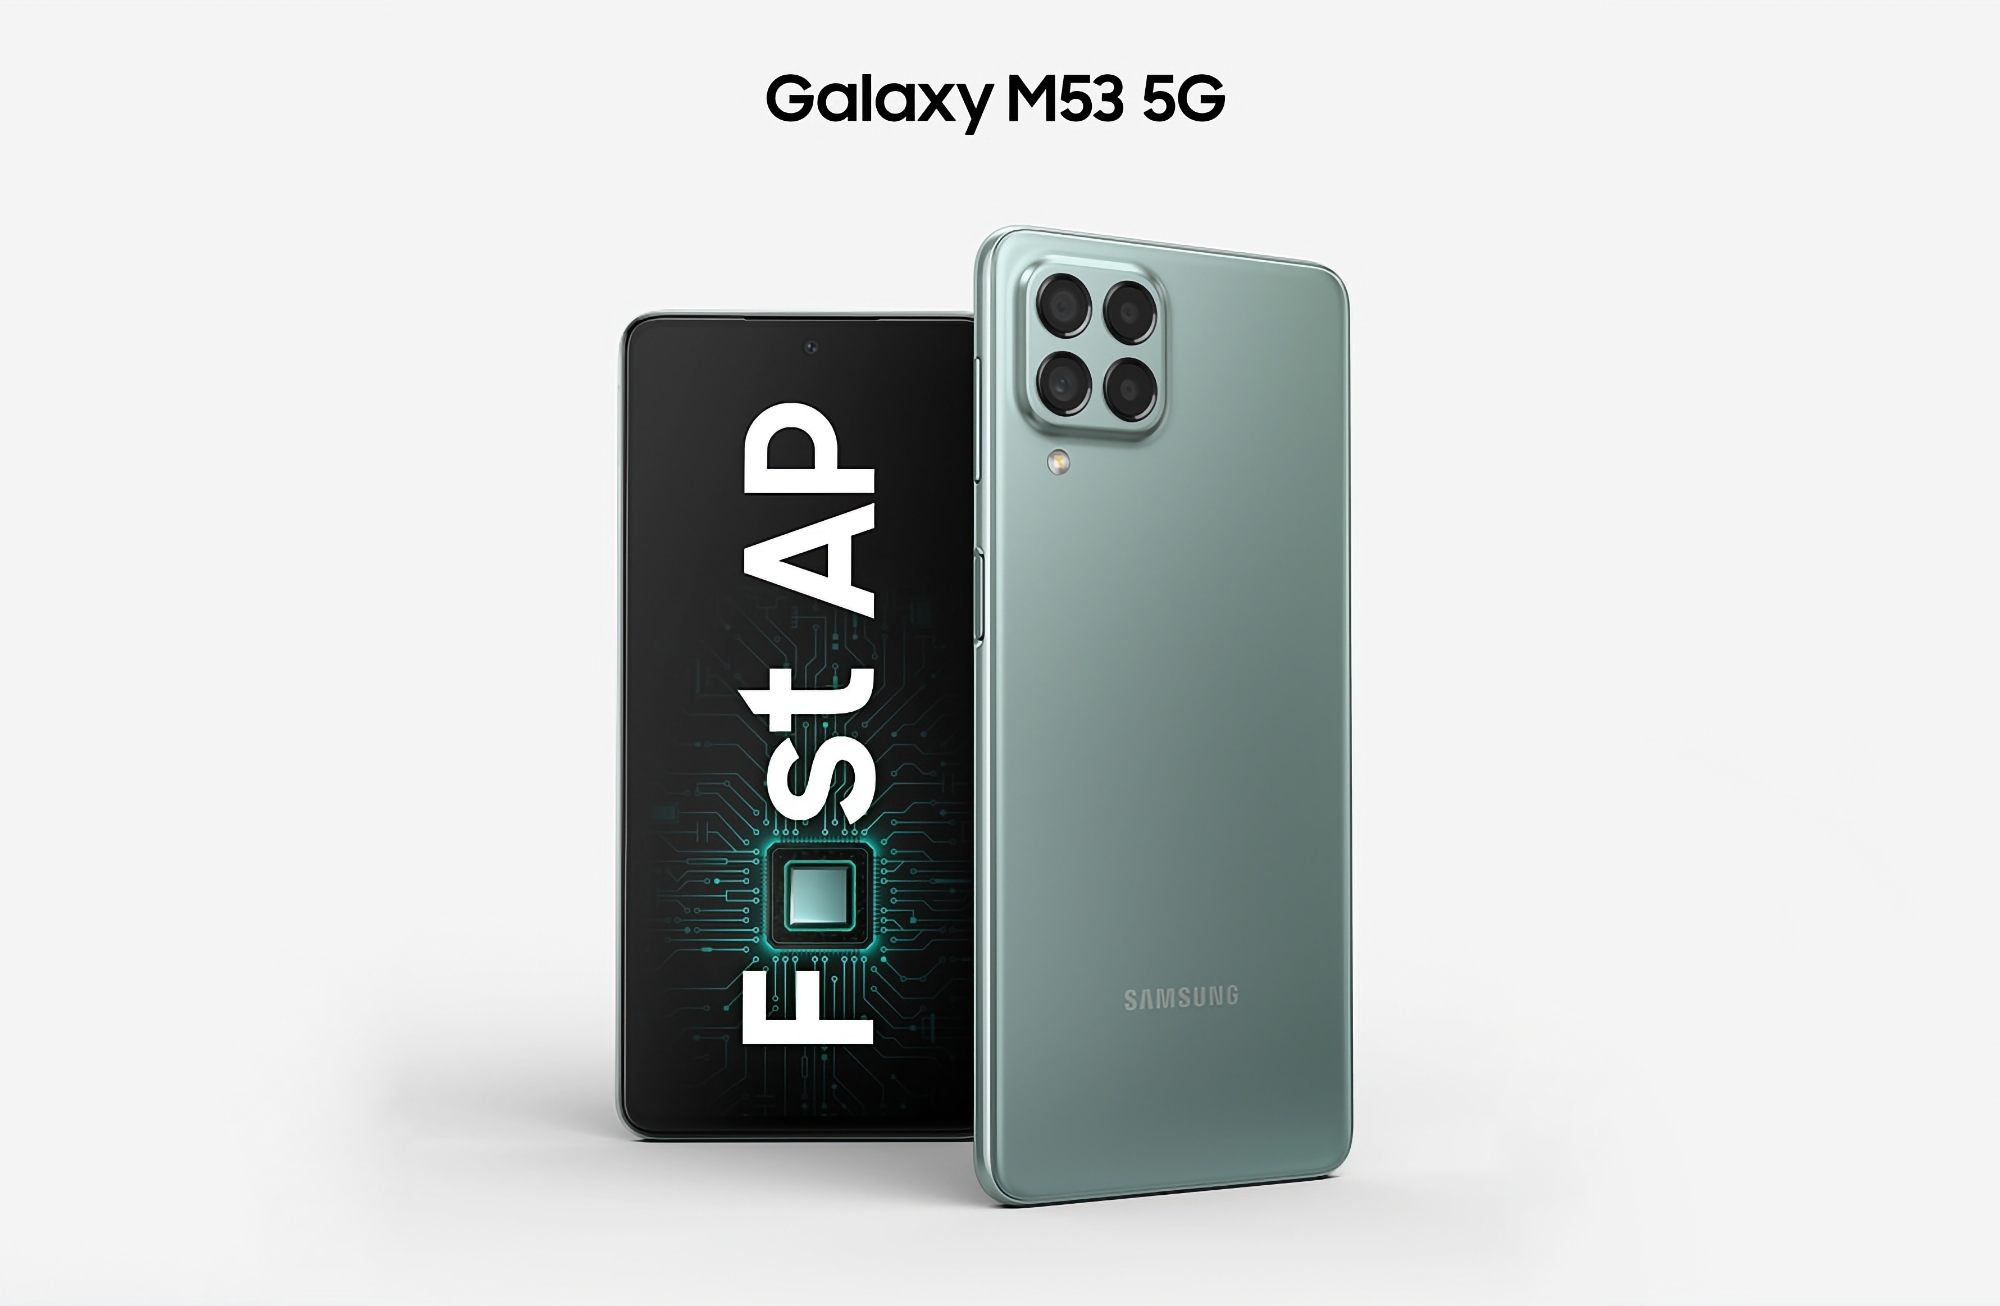 Samsung Galaxy M53 5G started getting Android 13 with One UI 5.0 in Europe